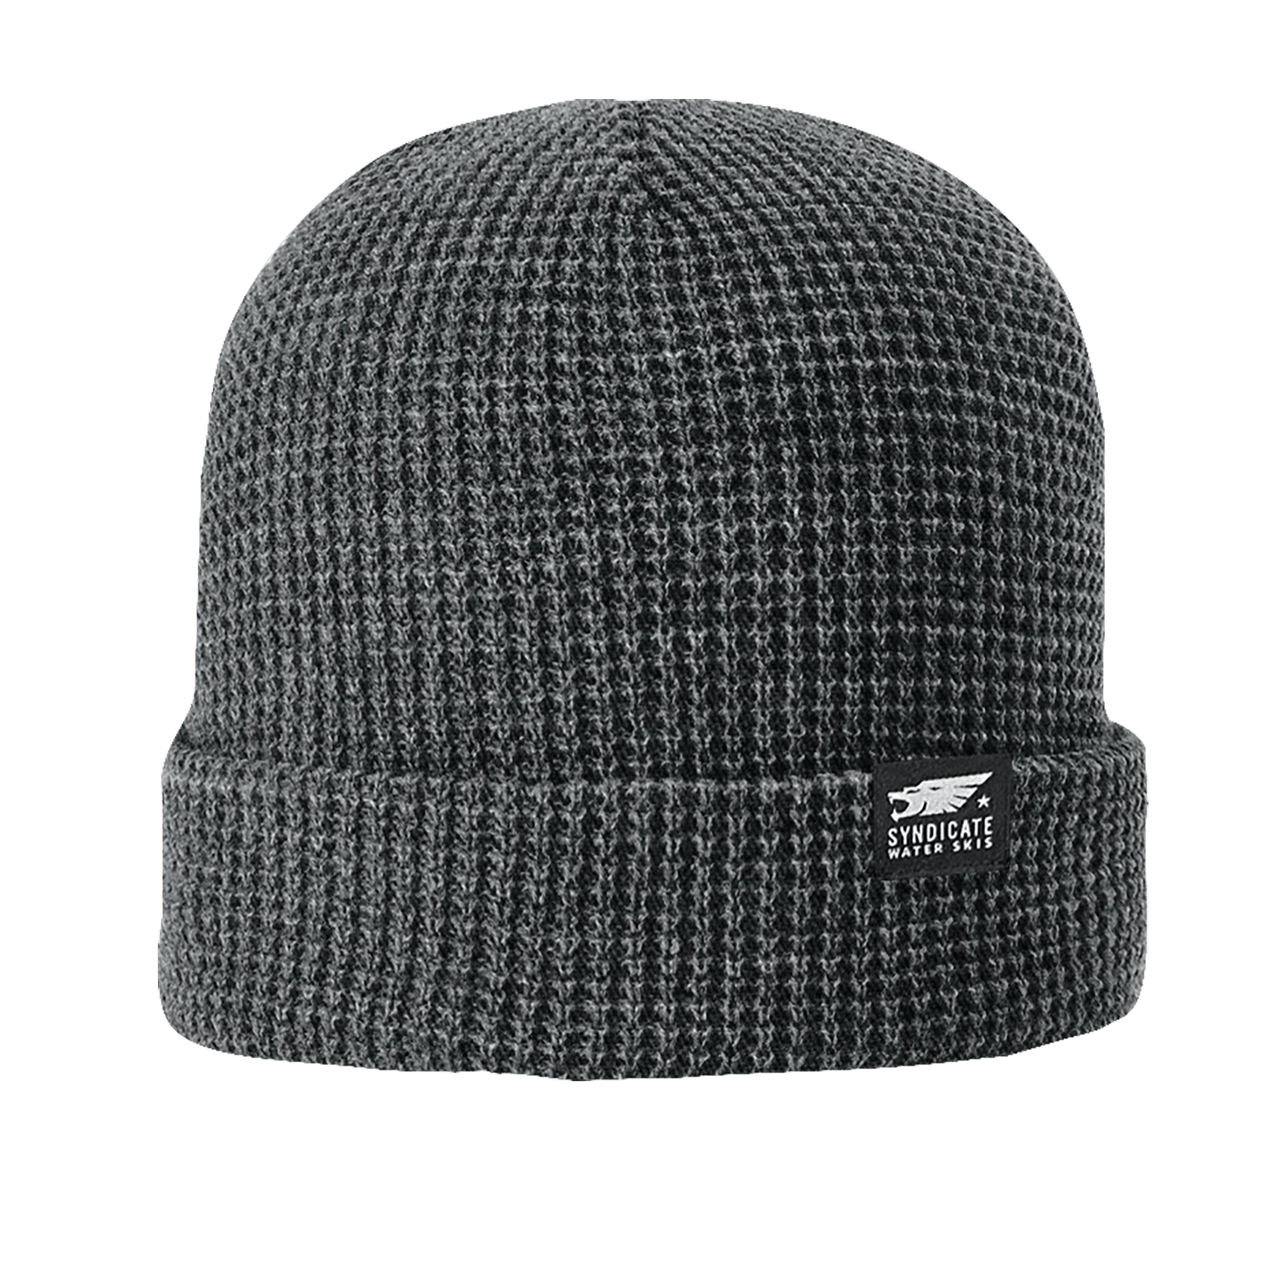 HO Sports Syndicate Rolled Beanie - Heather